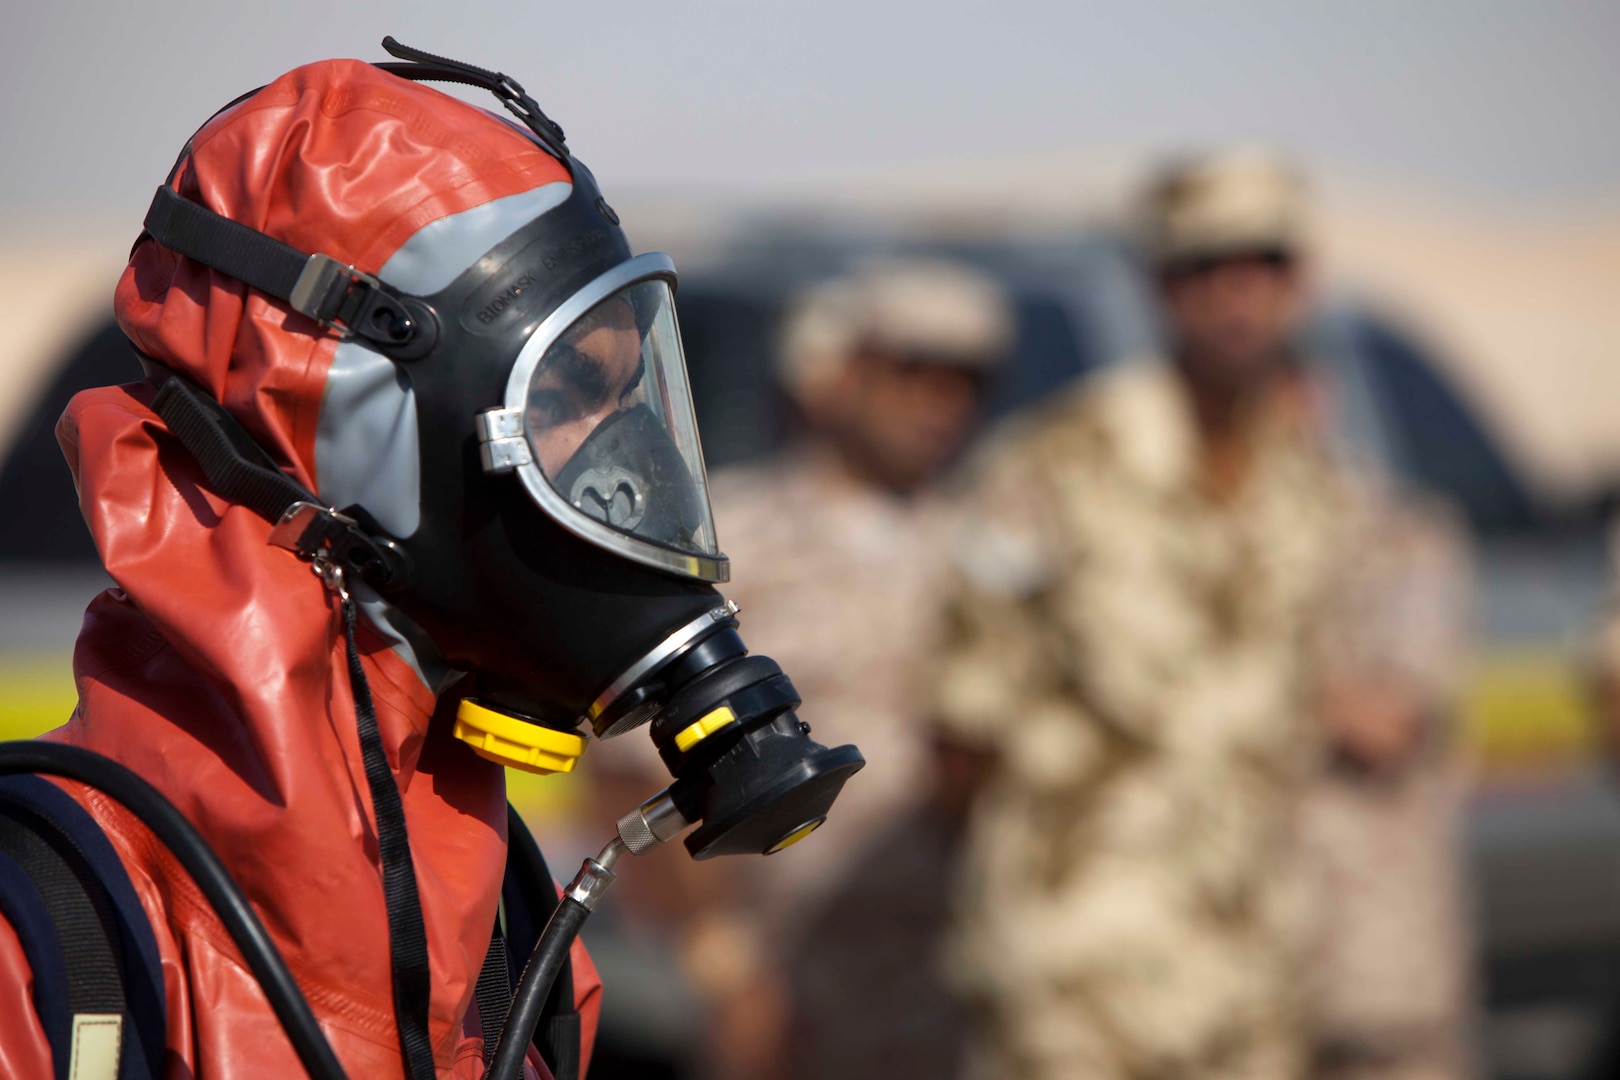 Bahrain Defense Force servicemember showcases protective chemical and biological protective suit to exercise participants of United Arab Emirates Union Defense Force, at Al Wathba, UAE training facility, as part of exercise Leading Edge, January 28, 2013 (U.S. Marine Corps/Leon M. Branchaud)